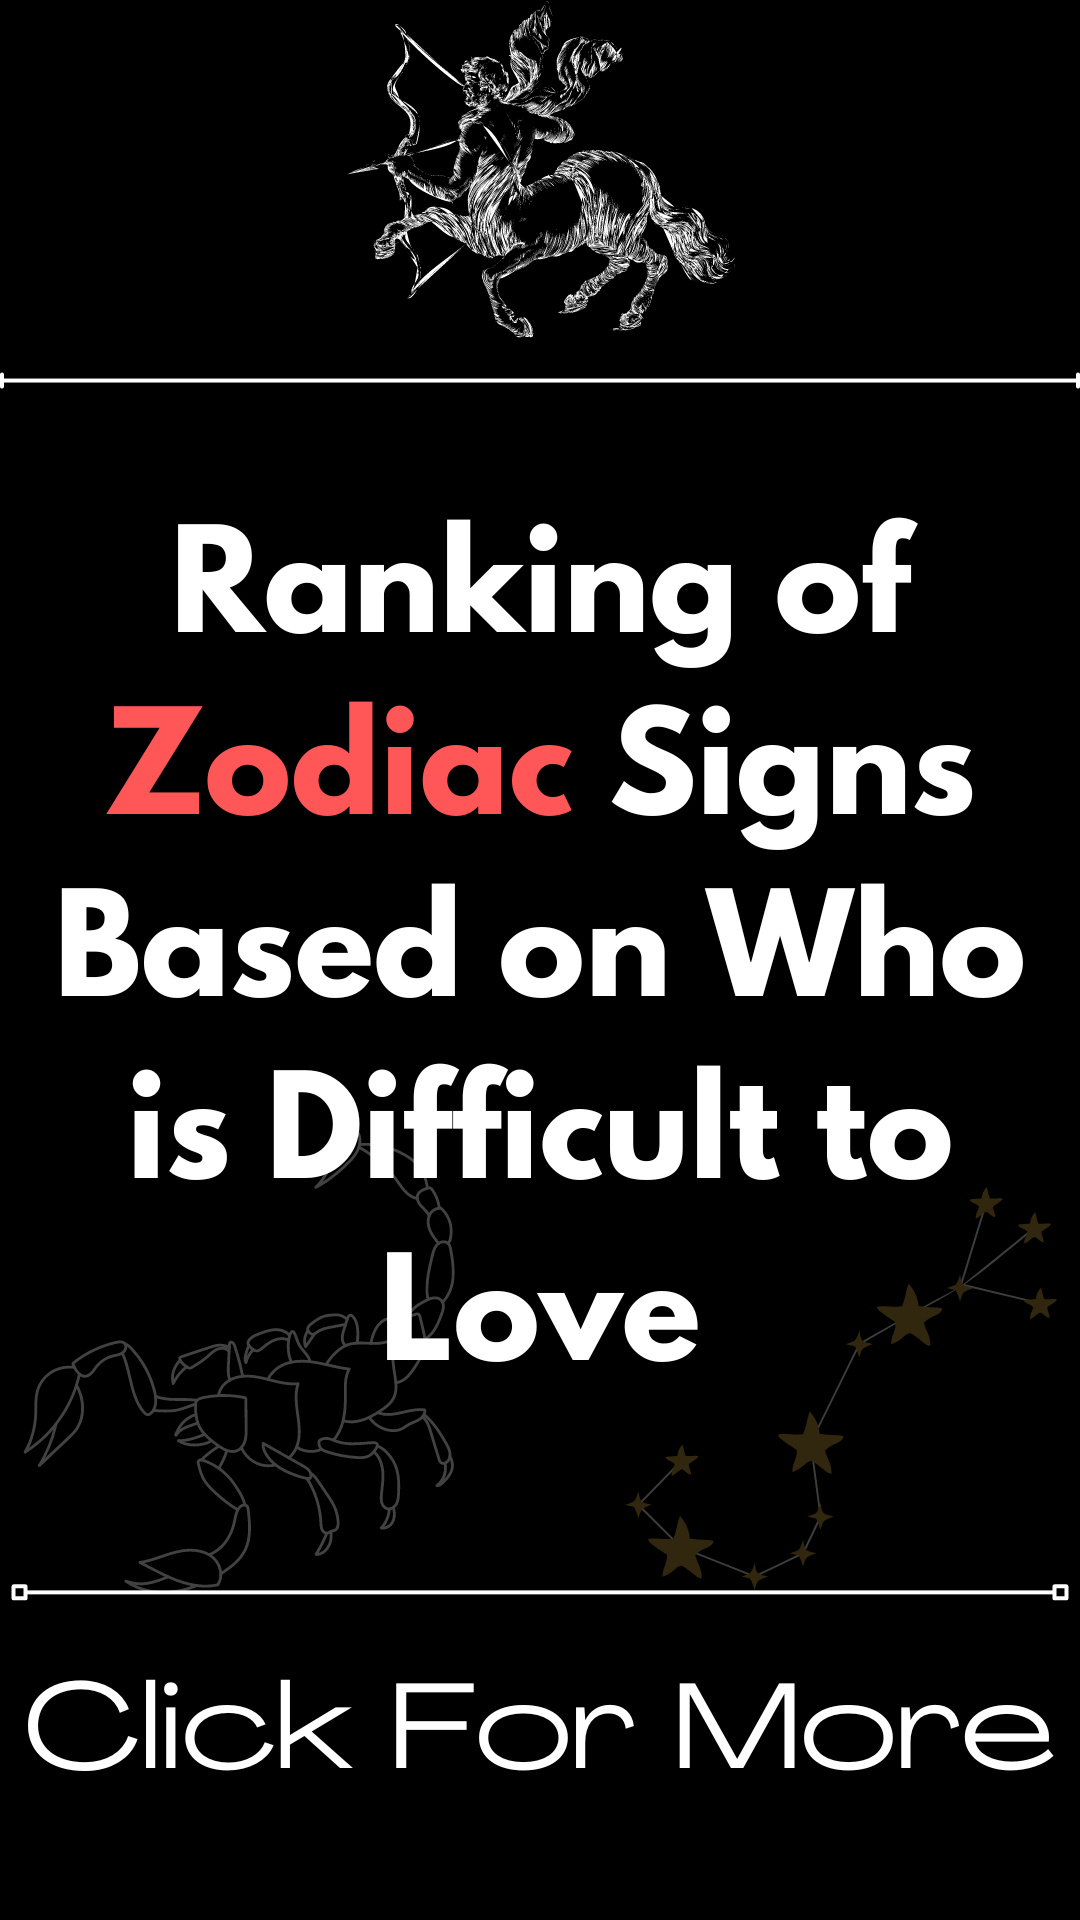 Ranking of Zodiac Signs Based on Who is Difficult to Love